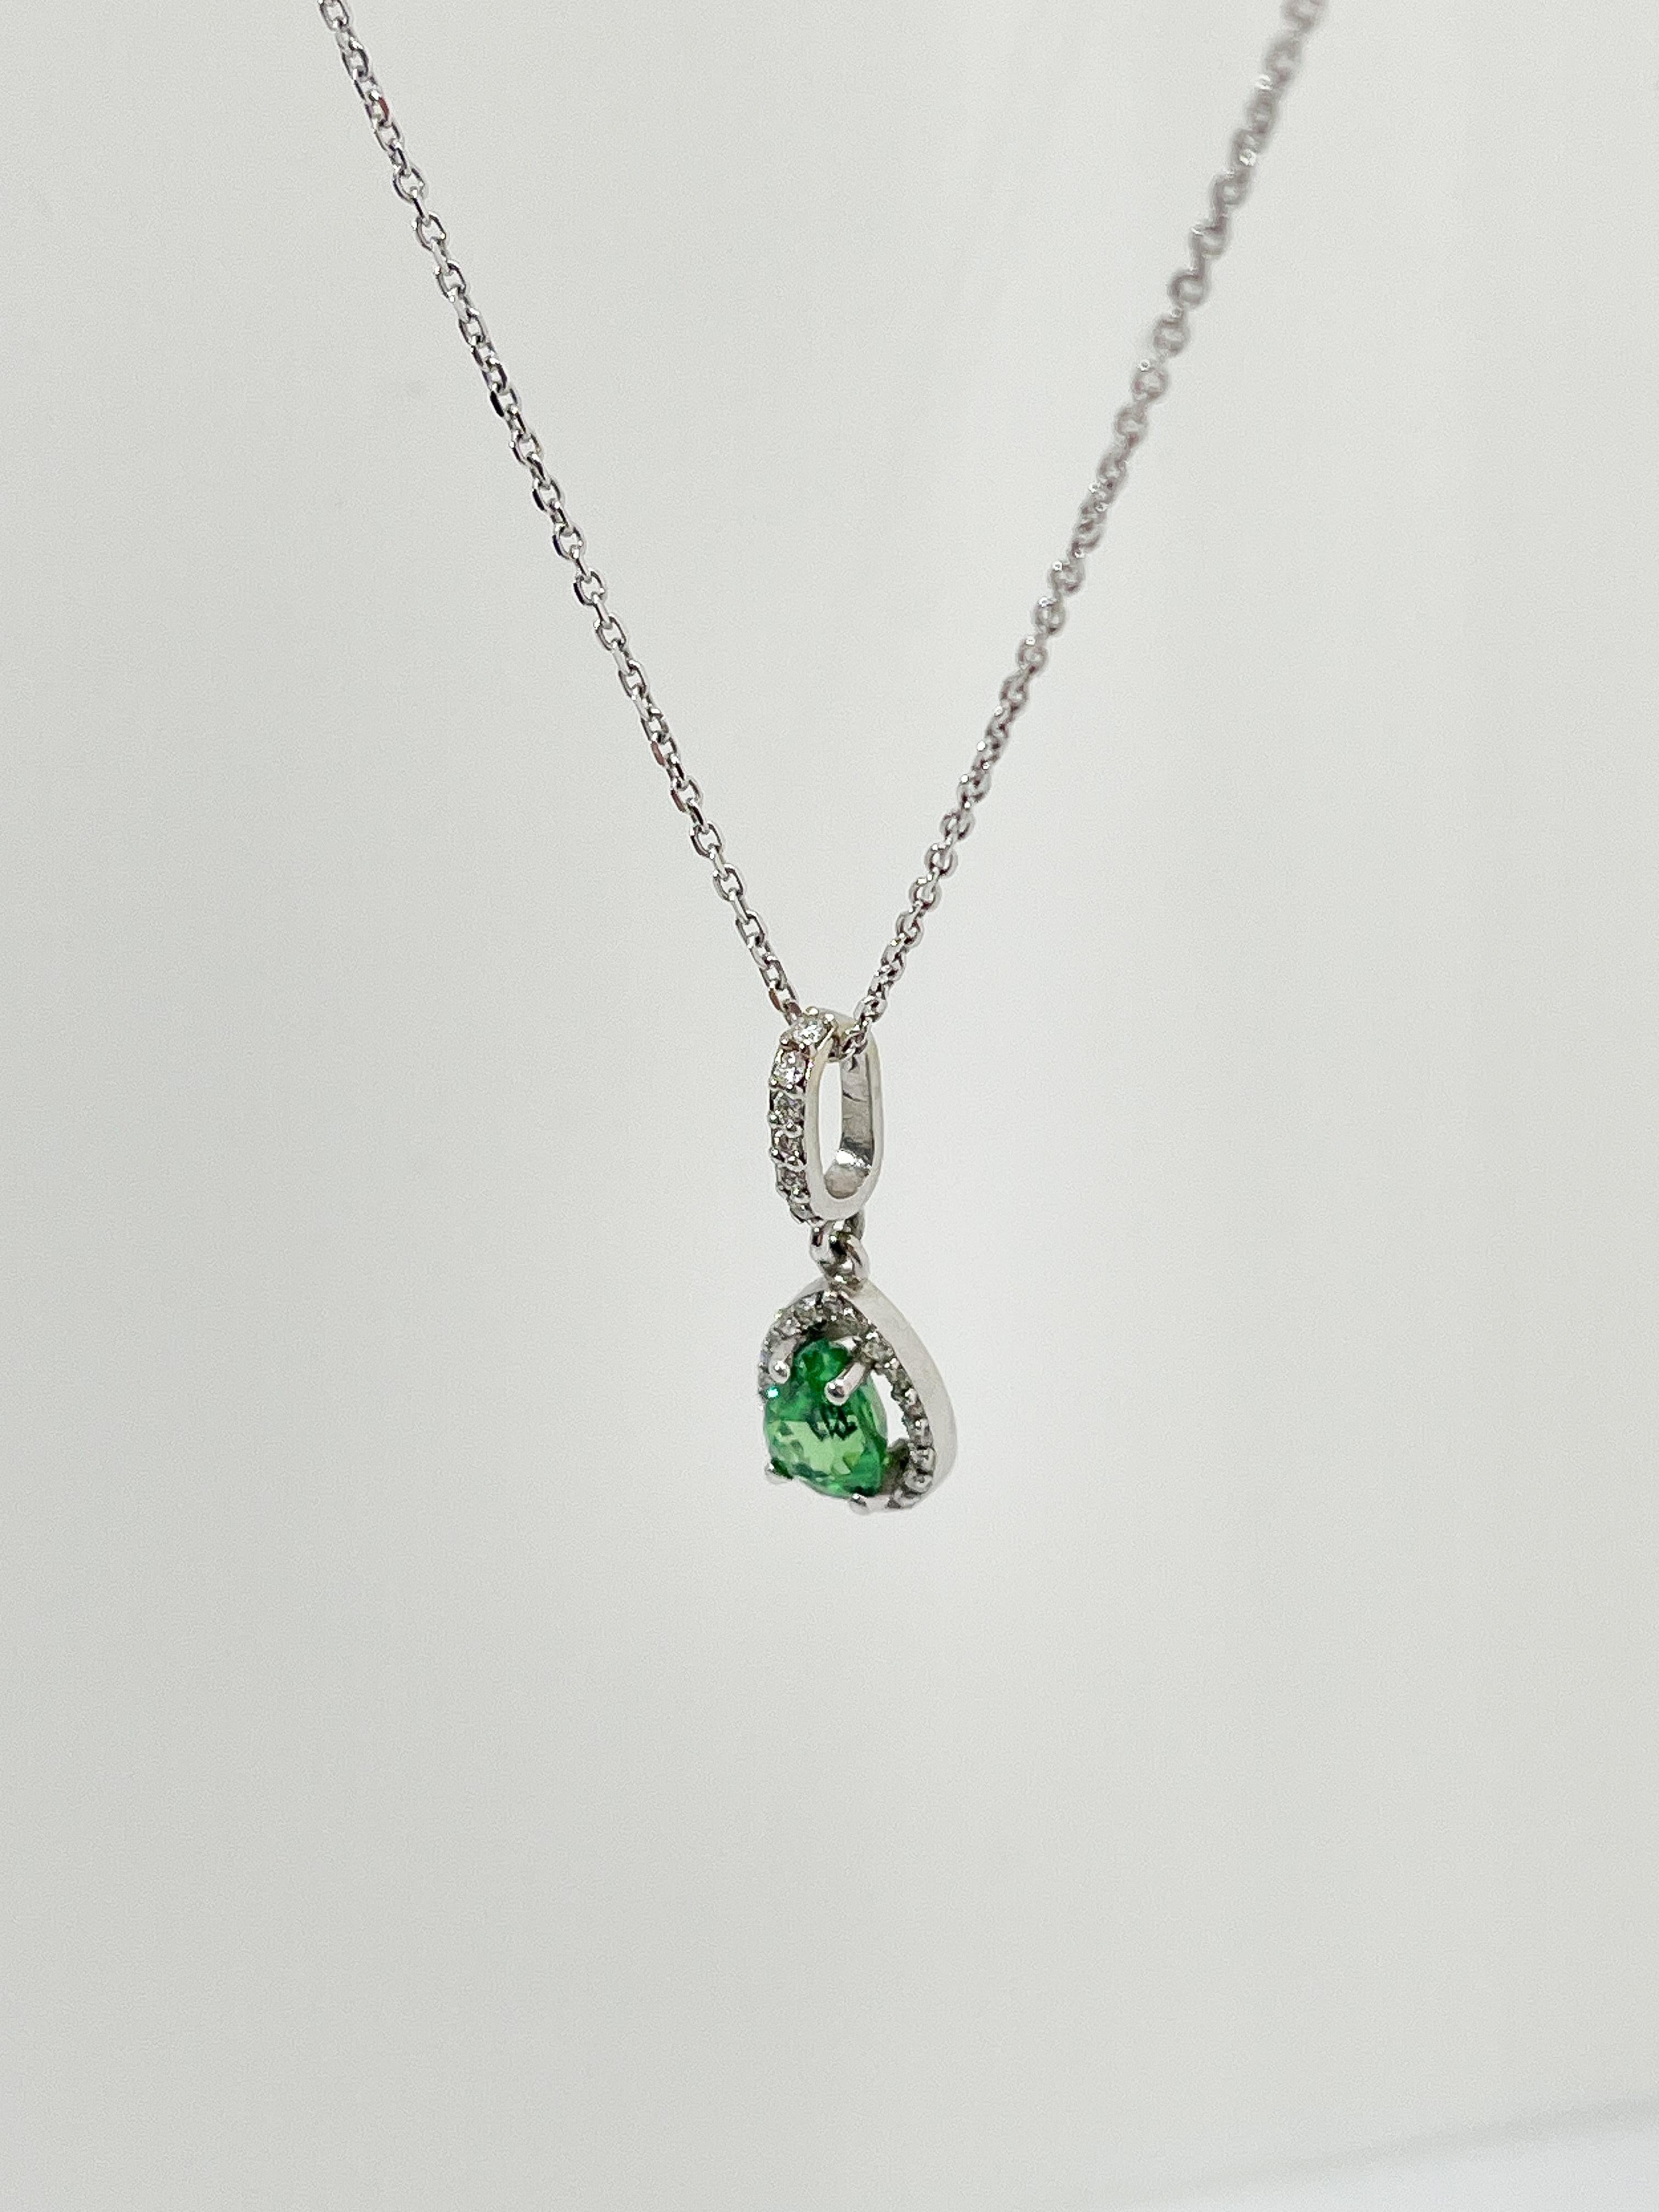 14K White Gold 1 CT Pear Tsavorite and Diamond Halo Necklace In Excellent Condition For Sale In Stuart, FL